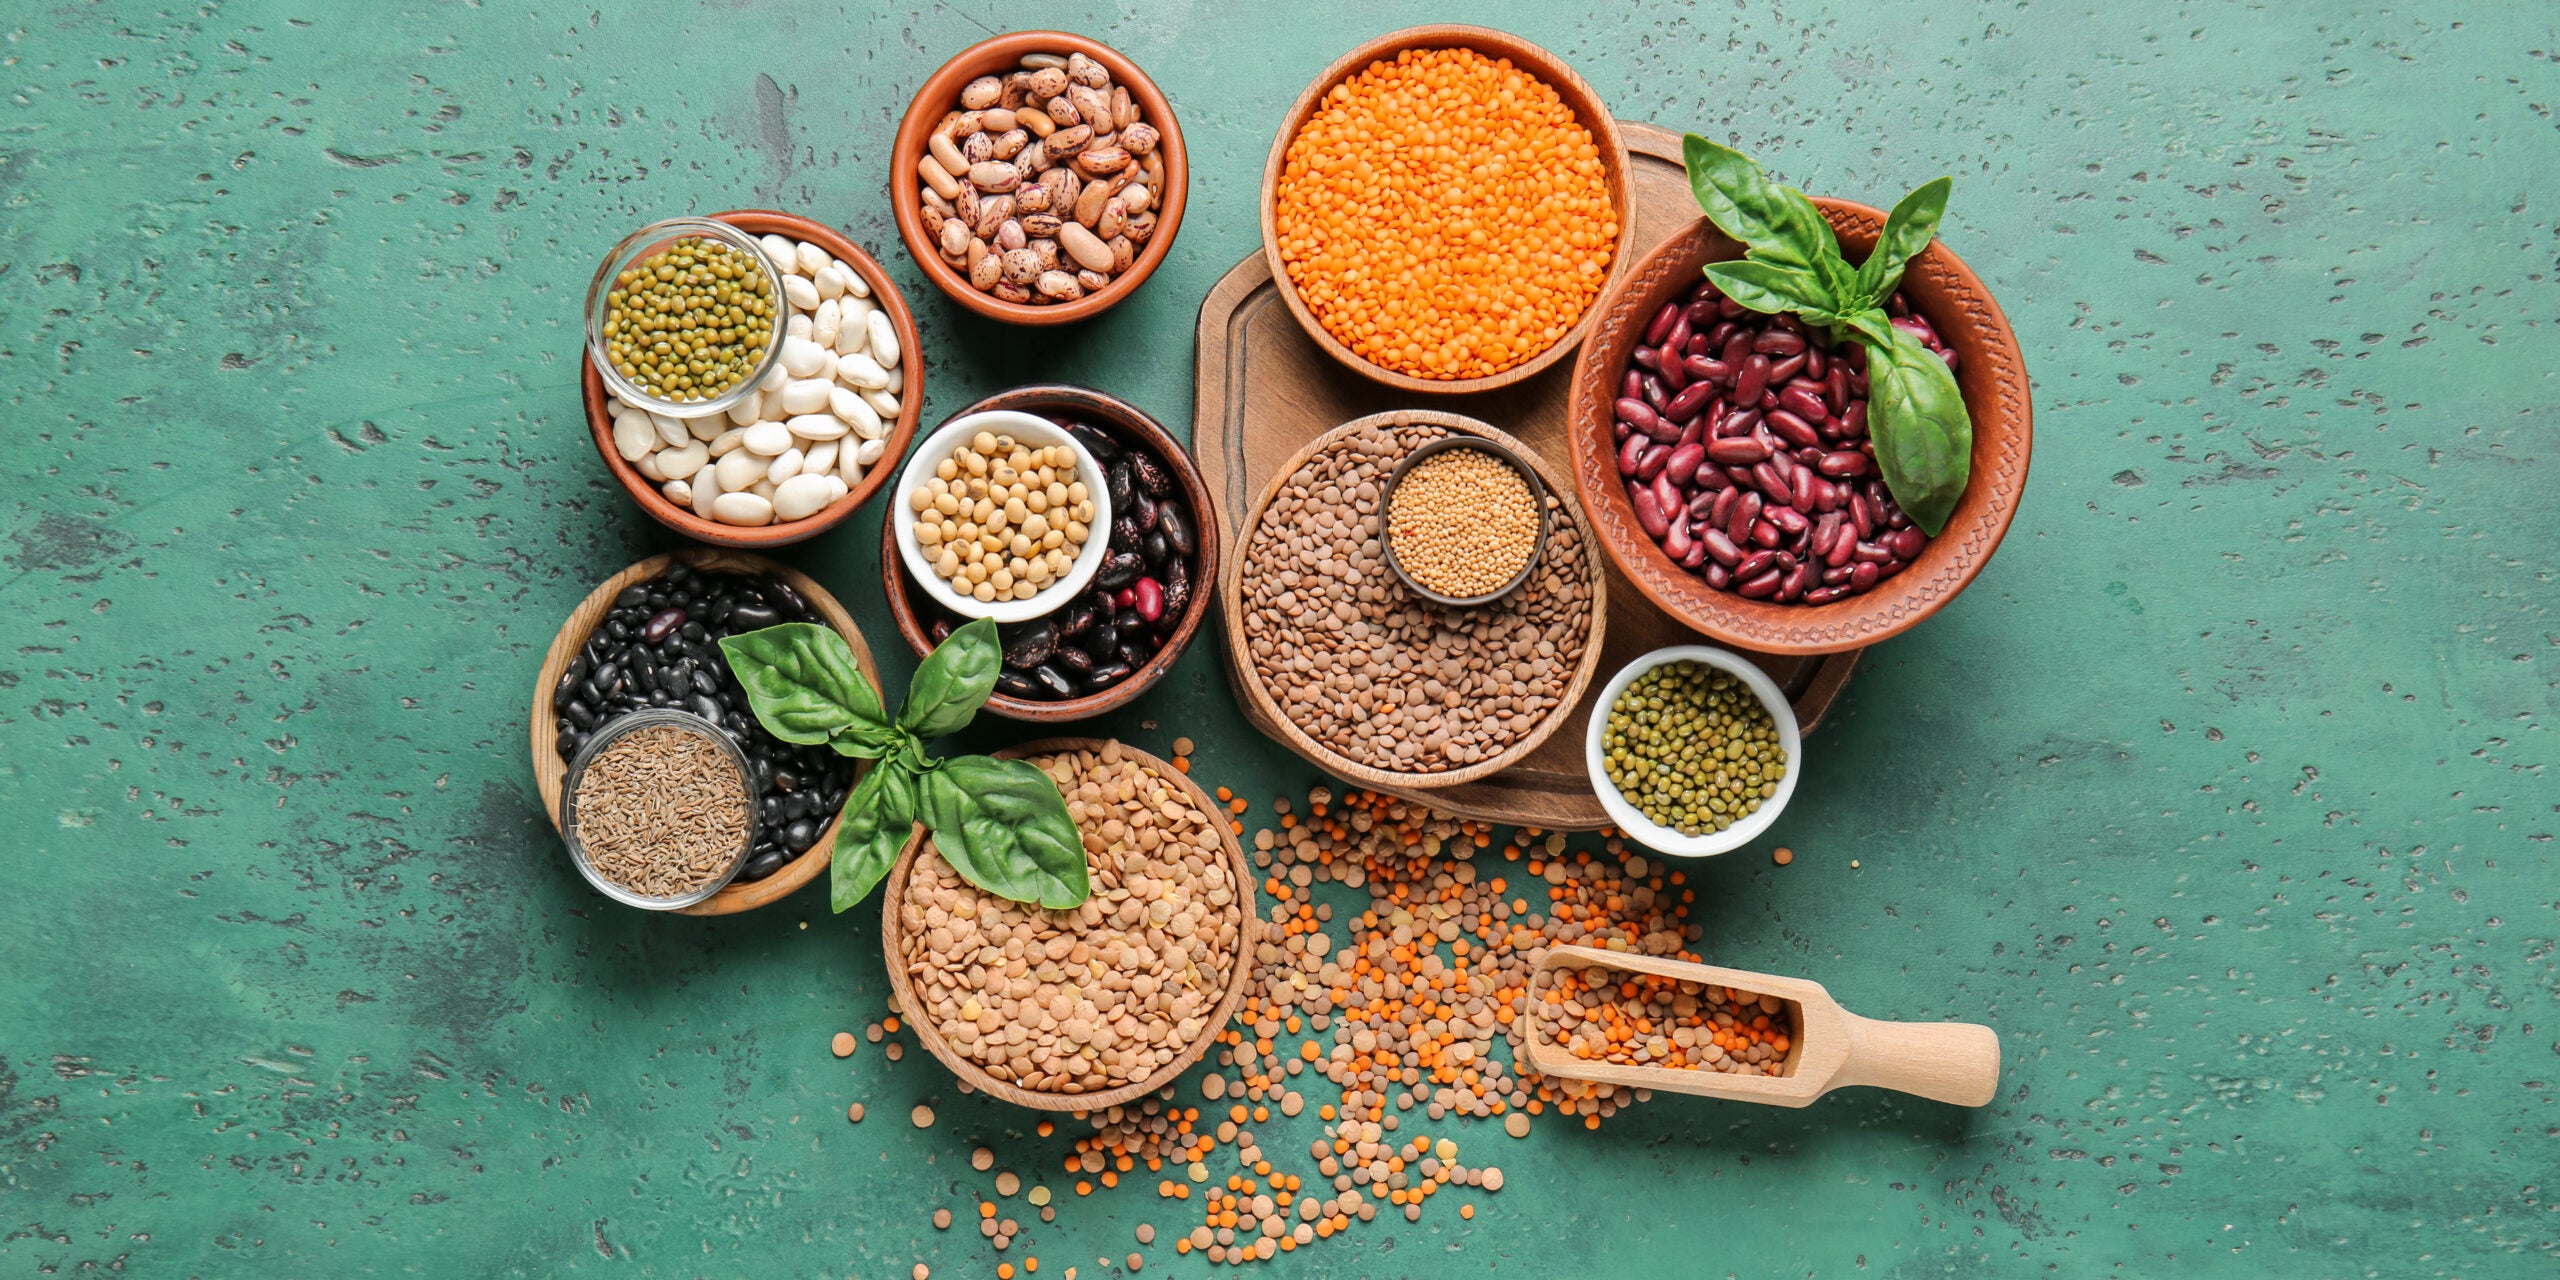 Flat lay of raw beans and spices on green background symbolizing a nutrient dense diet can help defer toxicant exposure and reduce colorectal cancer.